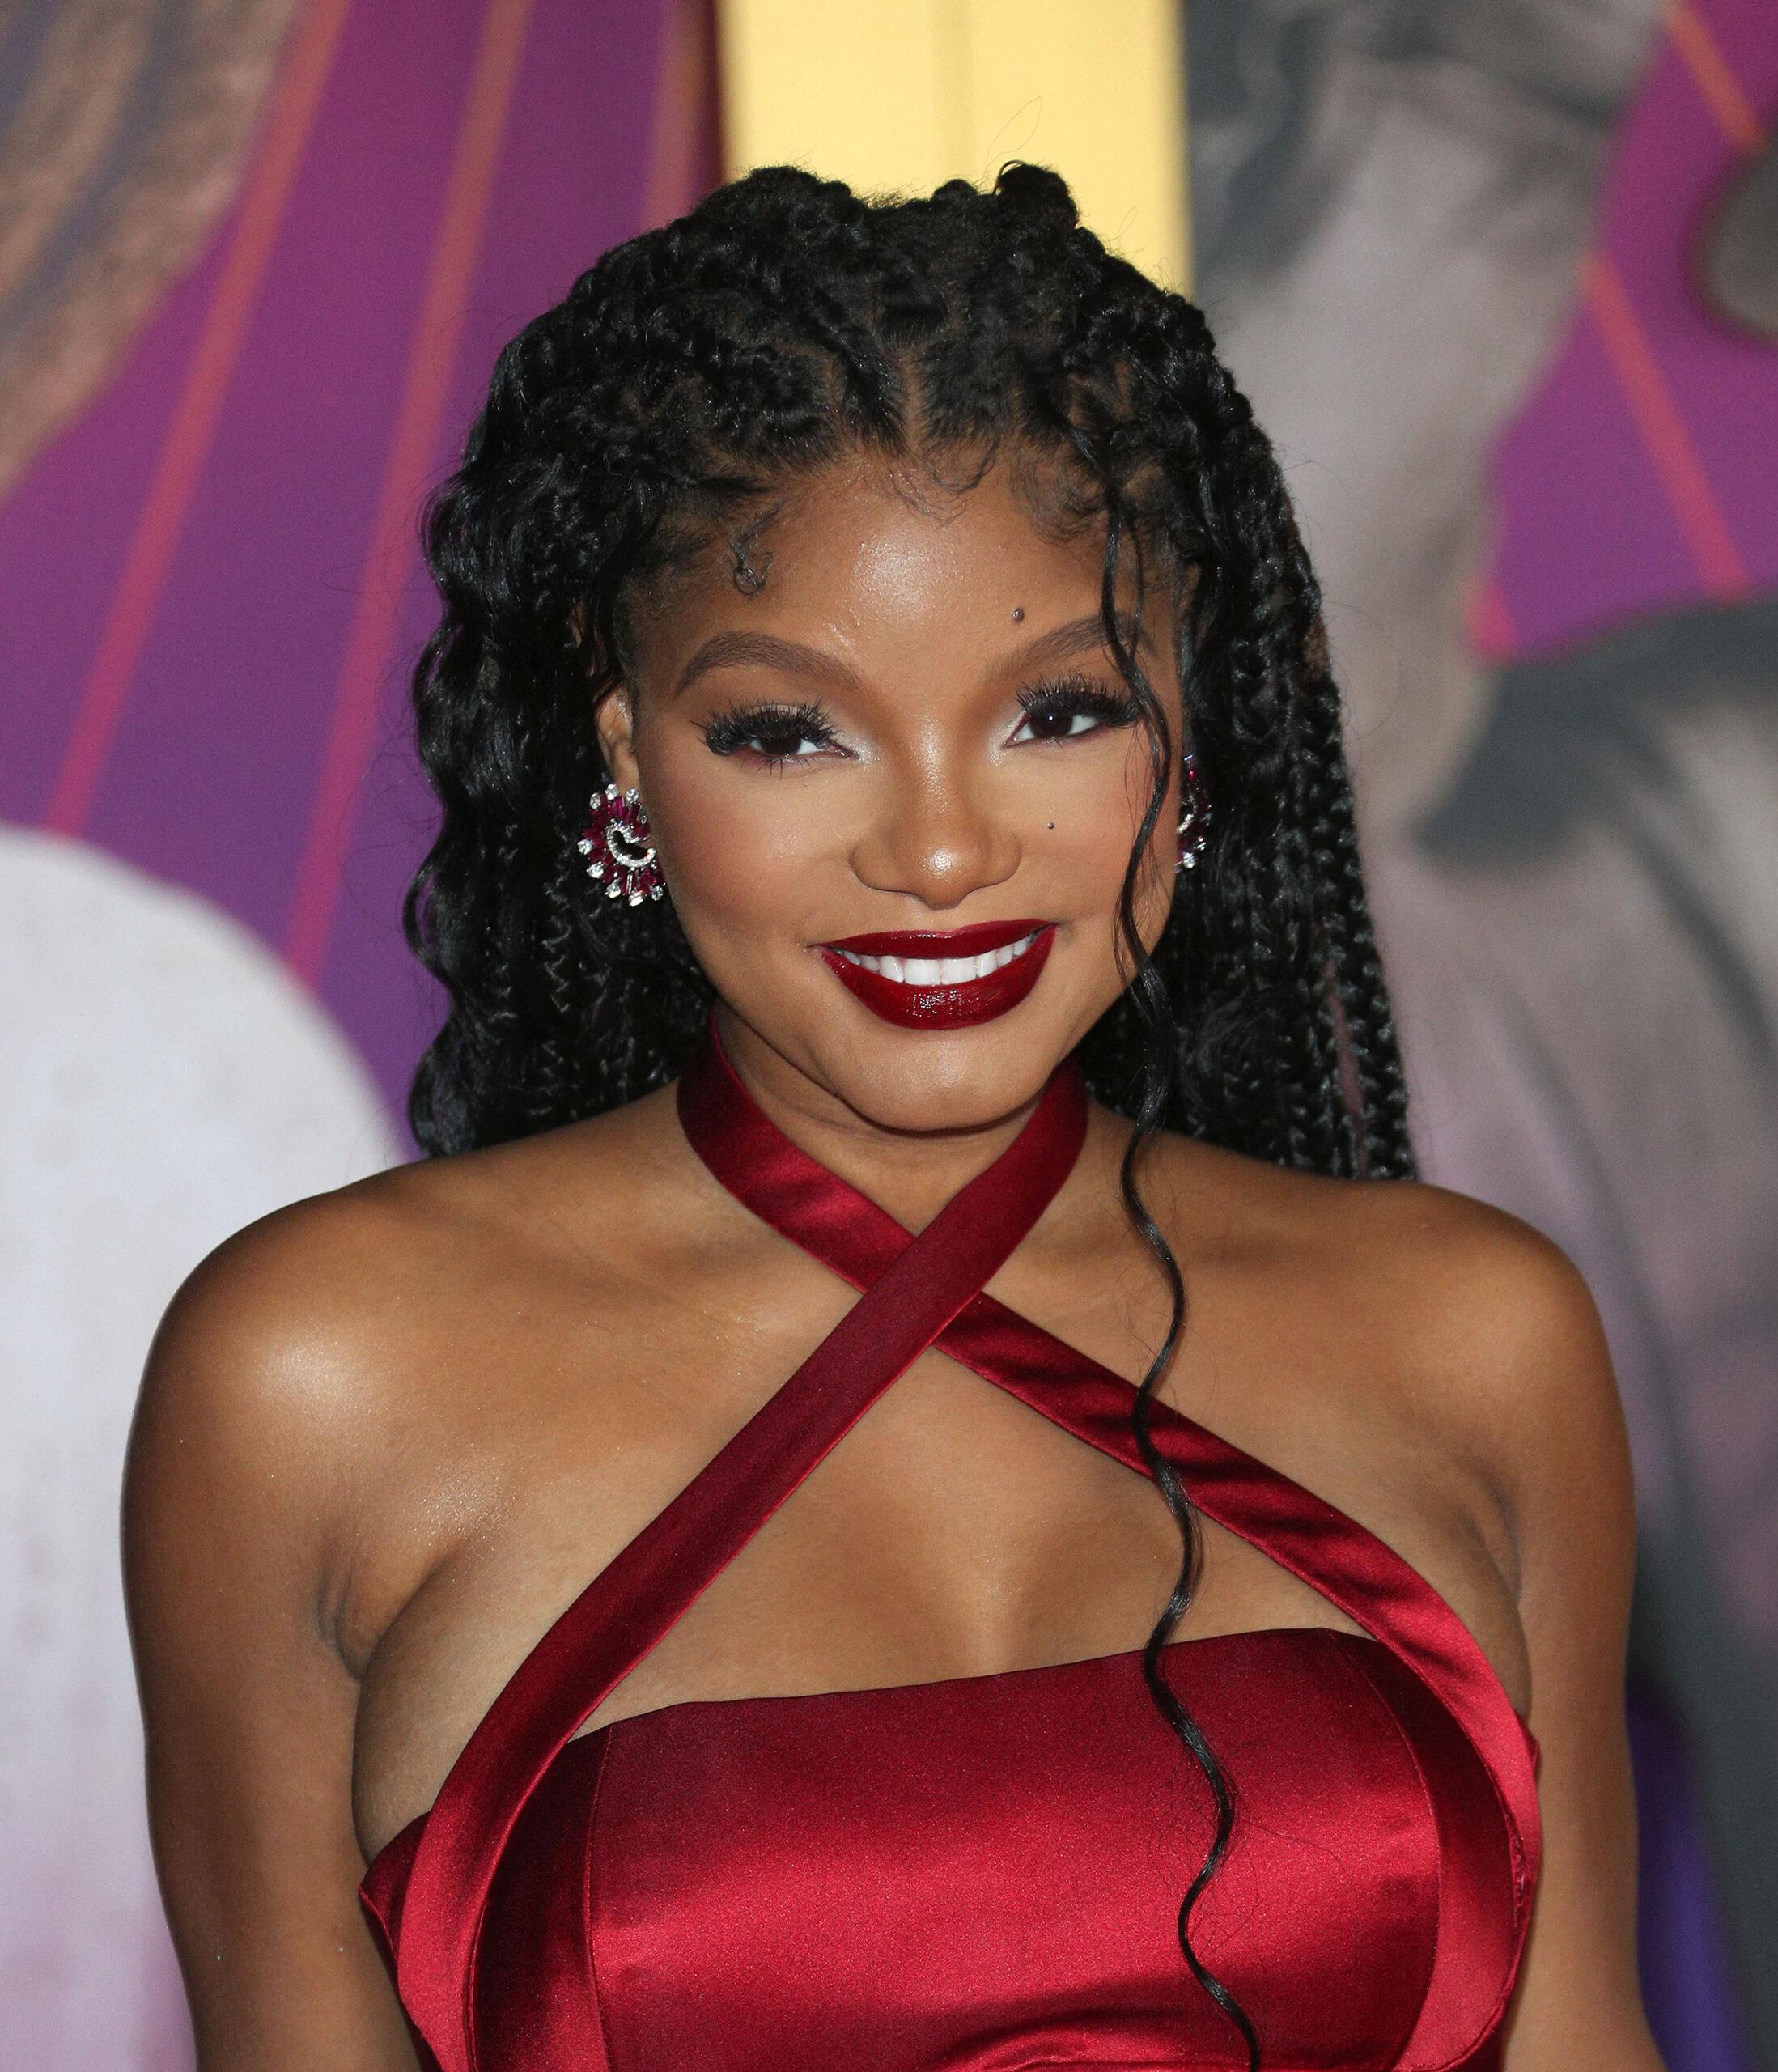 DDG talks about how Halle Bailey deals with motherhood.